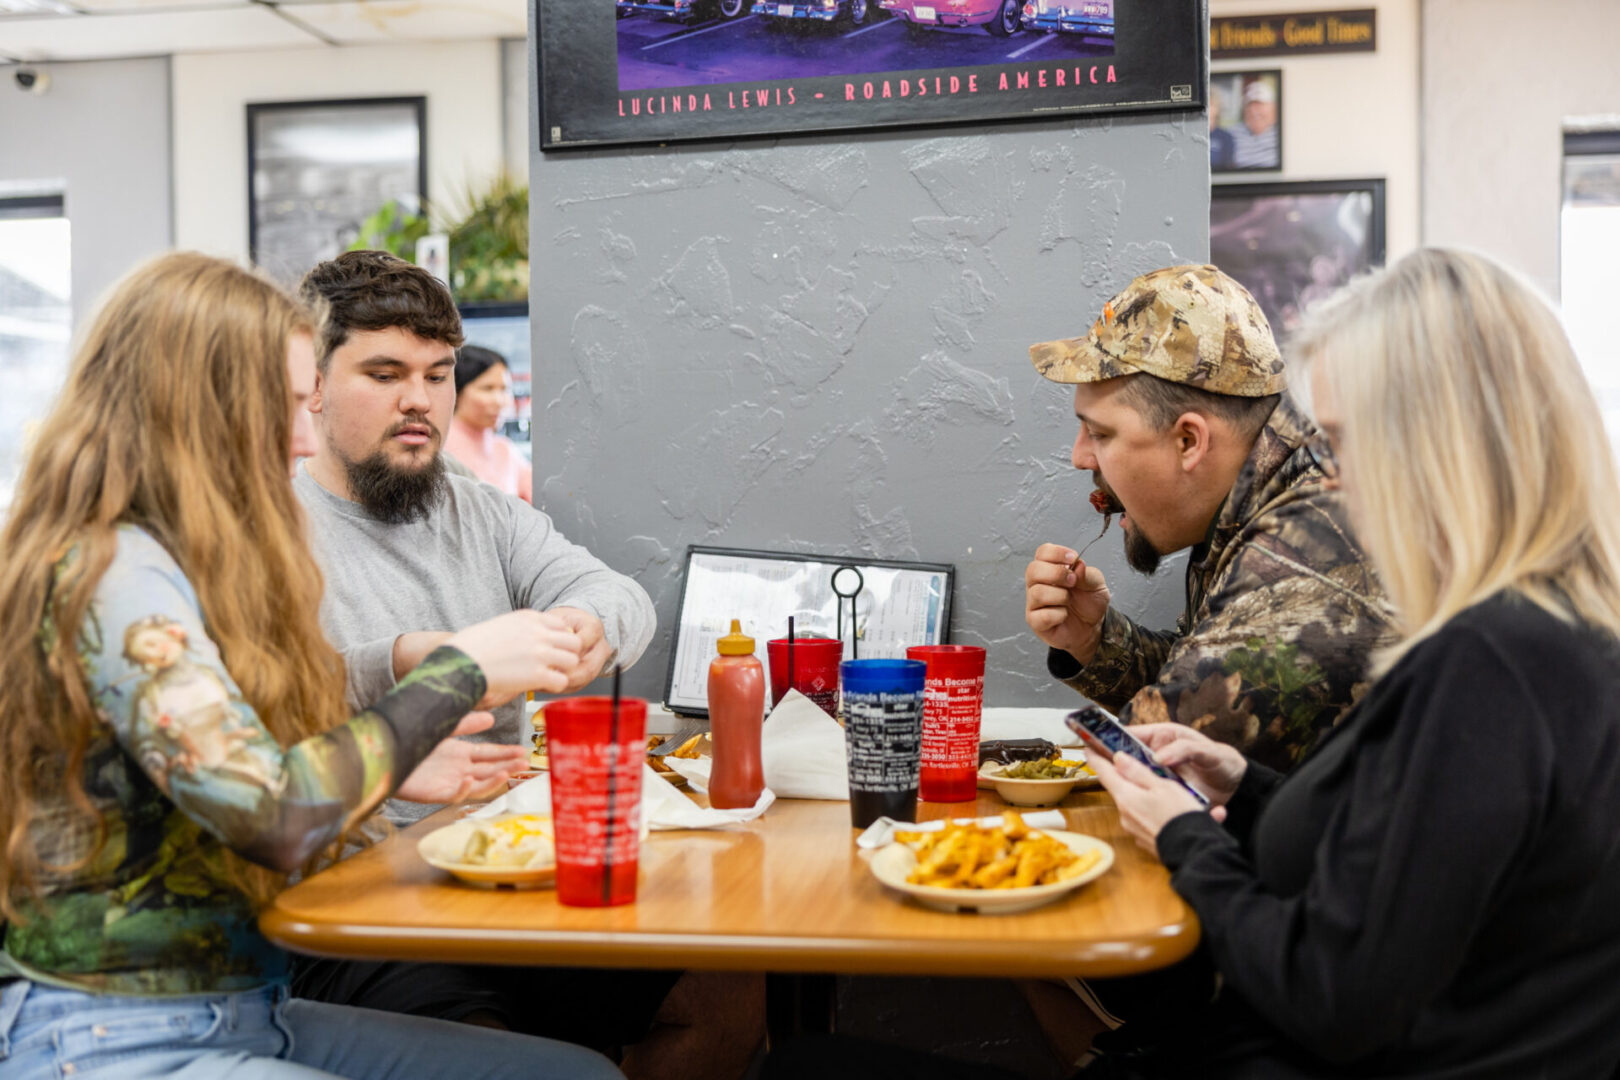 A group of people sitting at a table eating food.